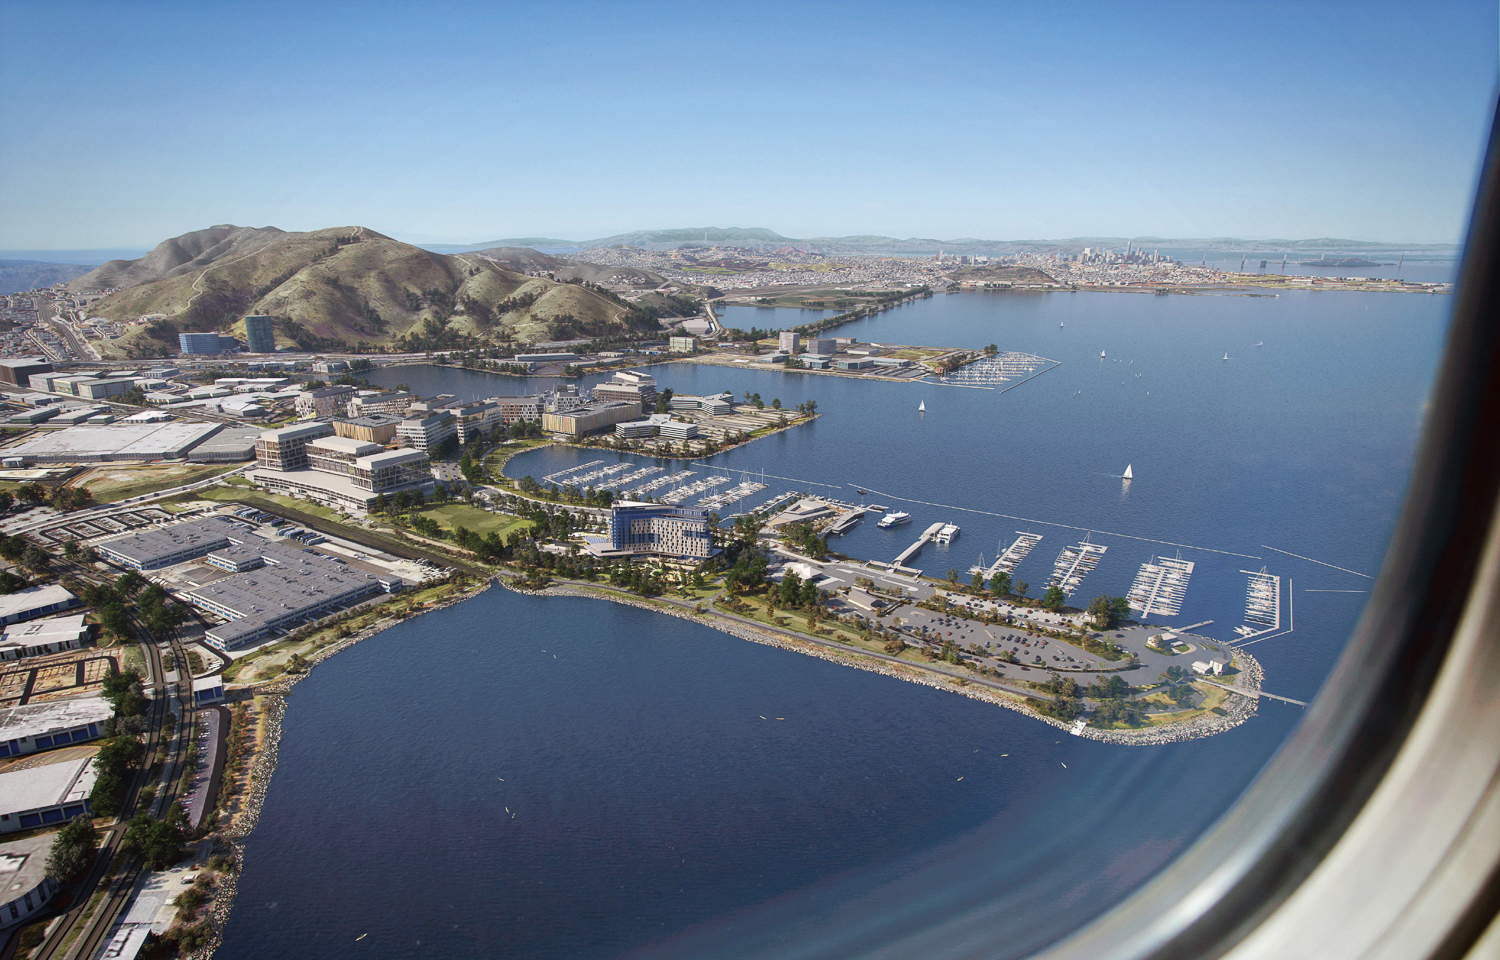 367 Marina Boulevard aerial view from an airport departing SFO, rendering by SB Architects